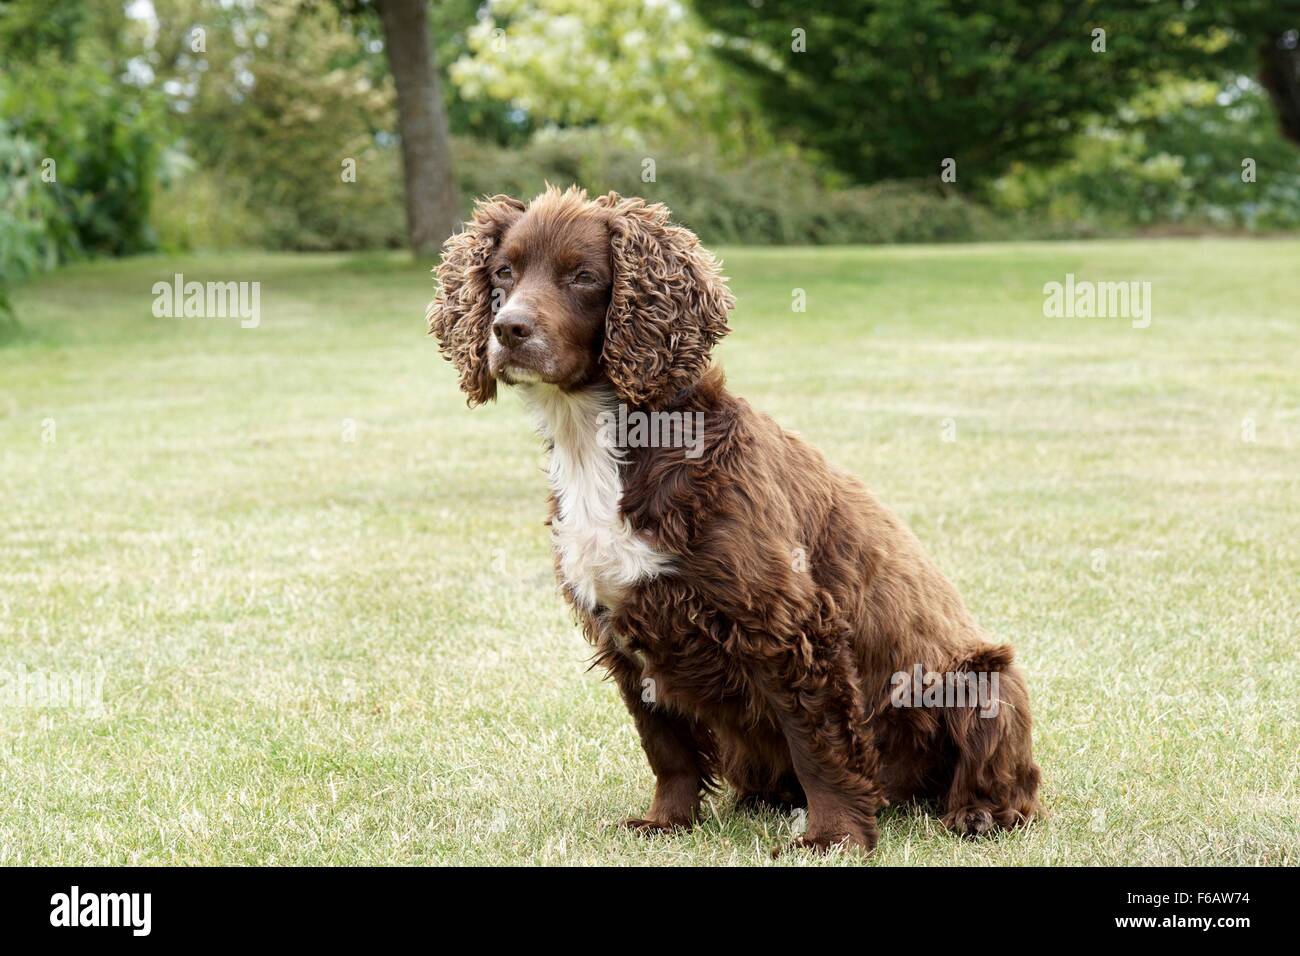 Liver and white Working Cocker Spaniel Stock Photo